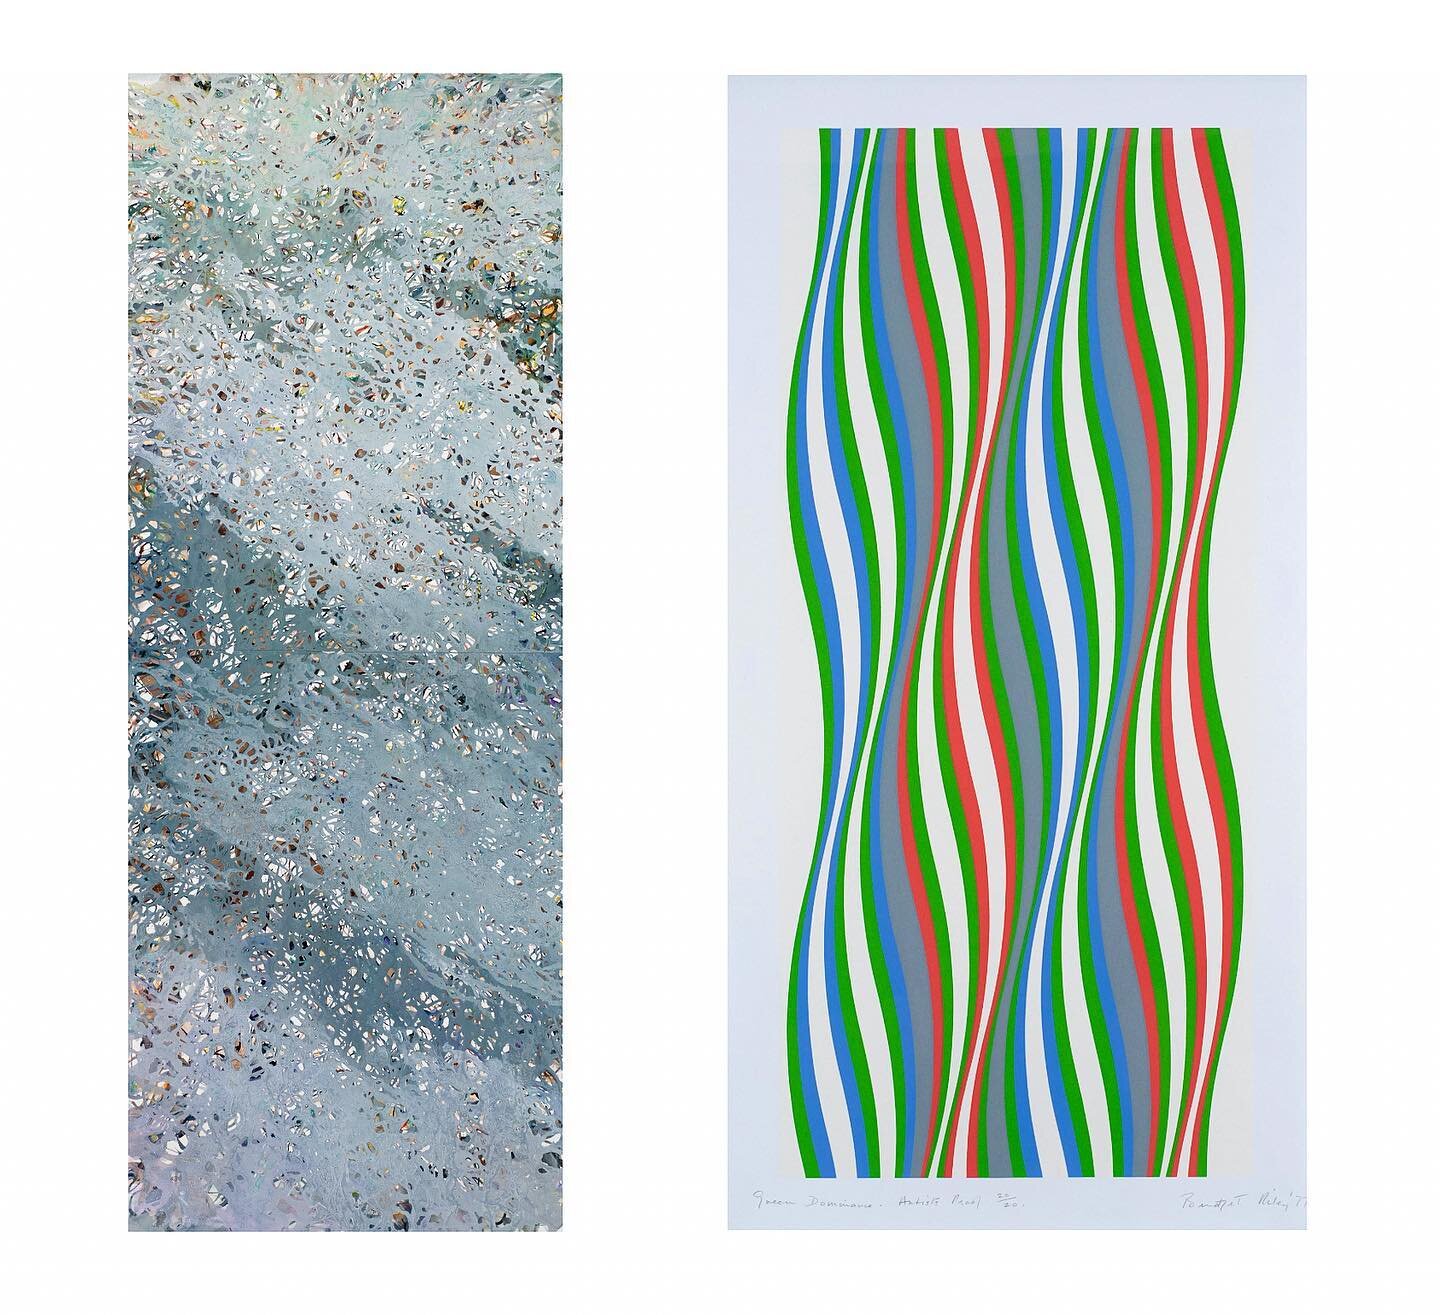 A chance to see these two vertical images side by side - the first my own and the second by Bridget Riley - in preparation for the forthcoming two person show of works on paper @frestoniangallery . Apparently so very different in approach and yet res